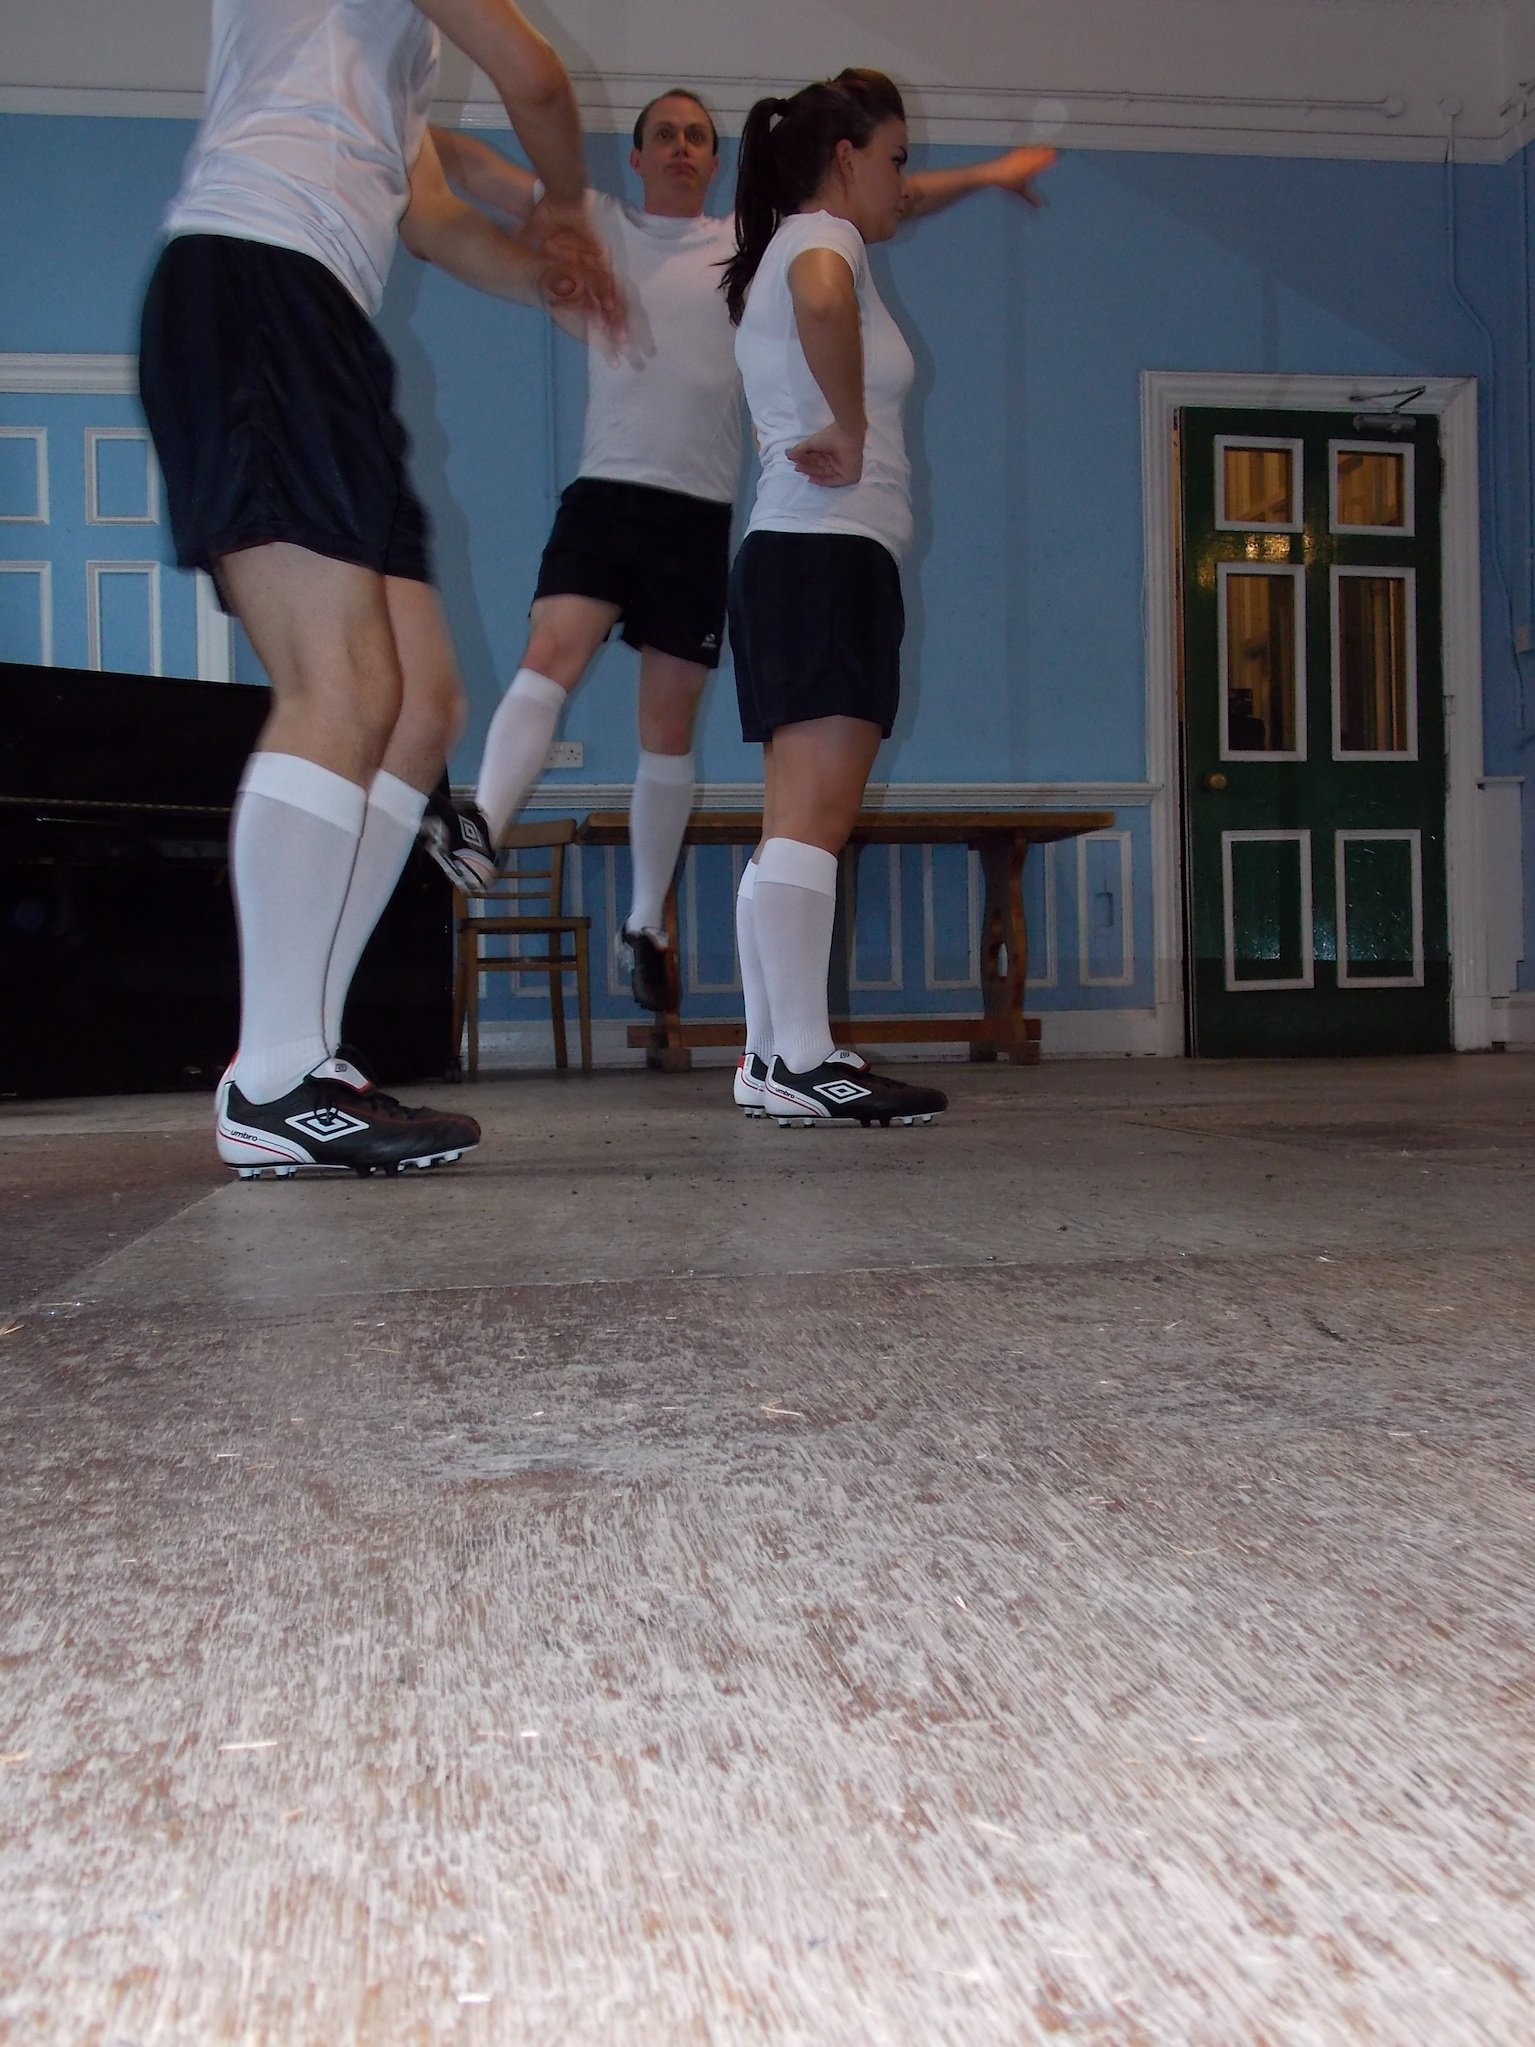 Tap dancers in football boots